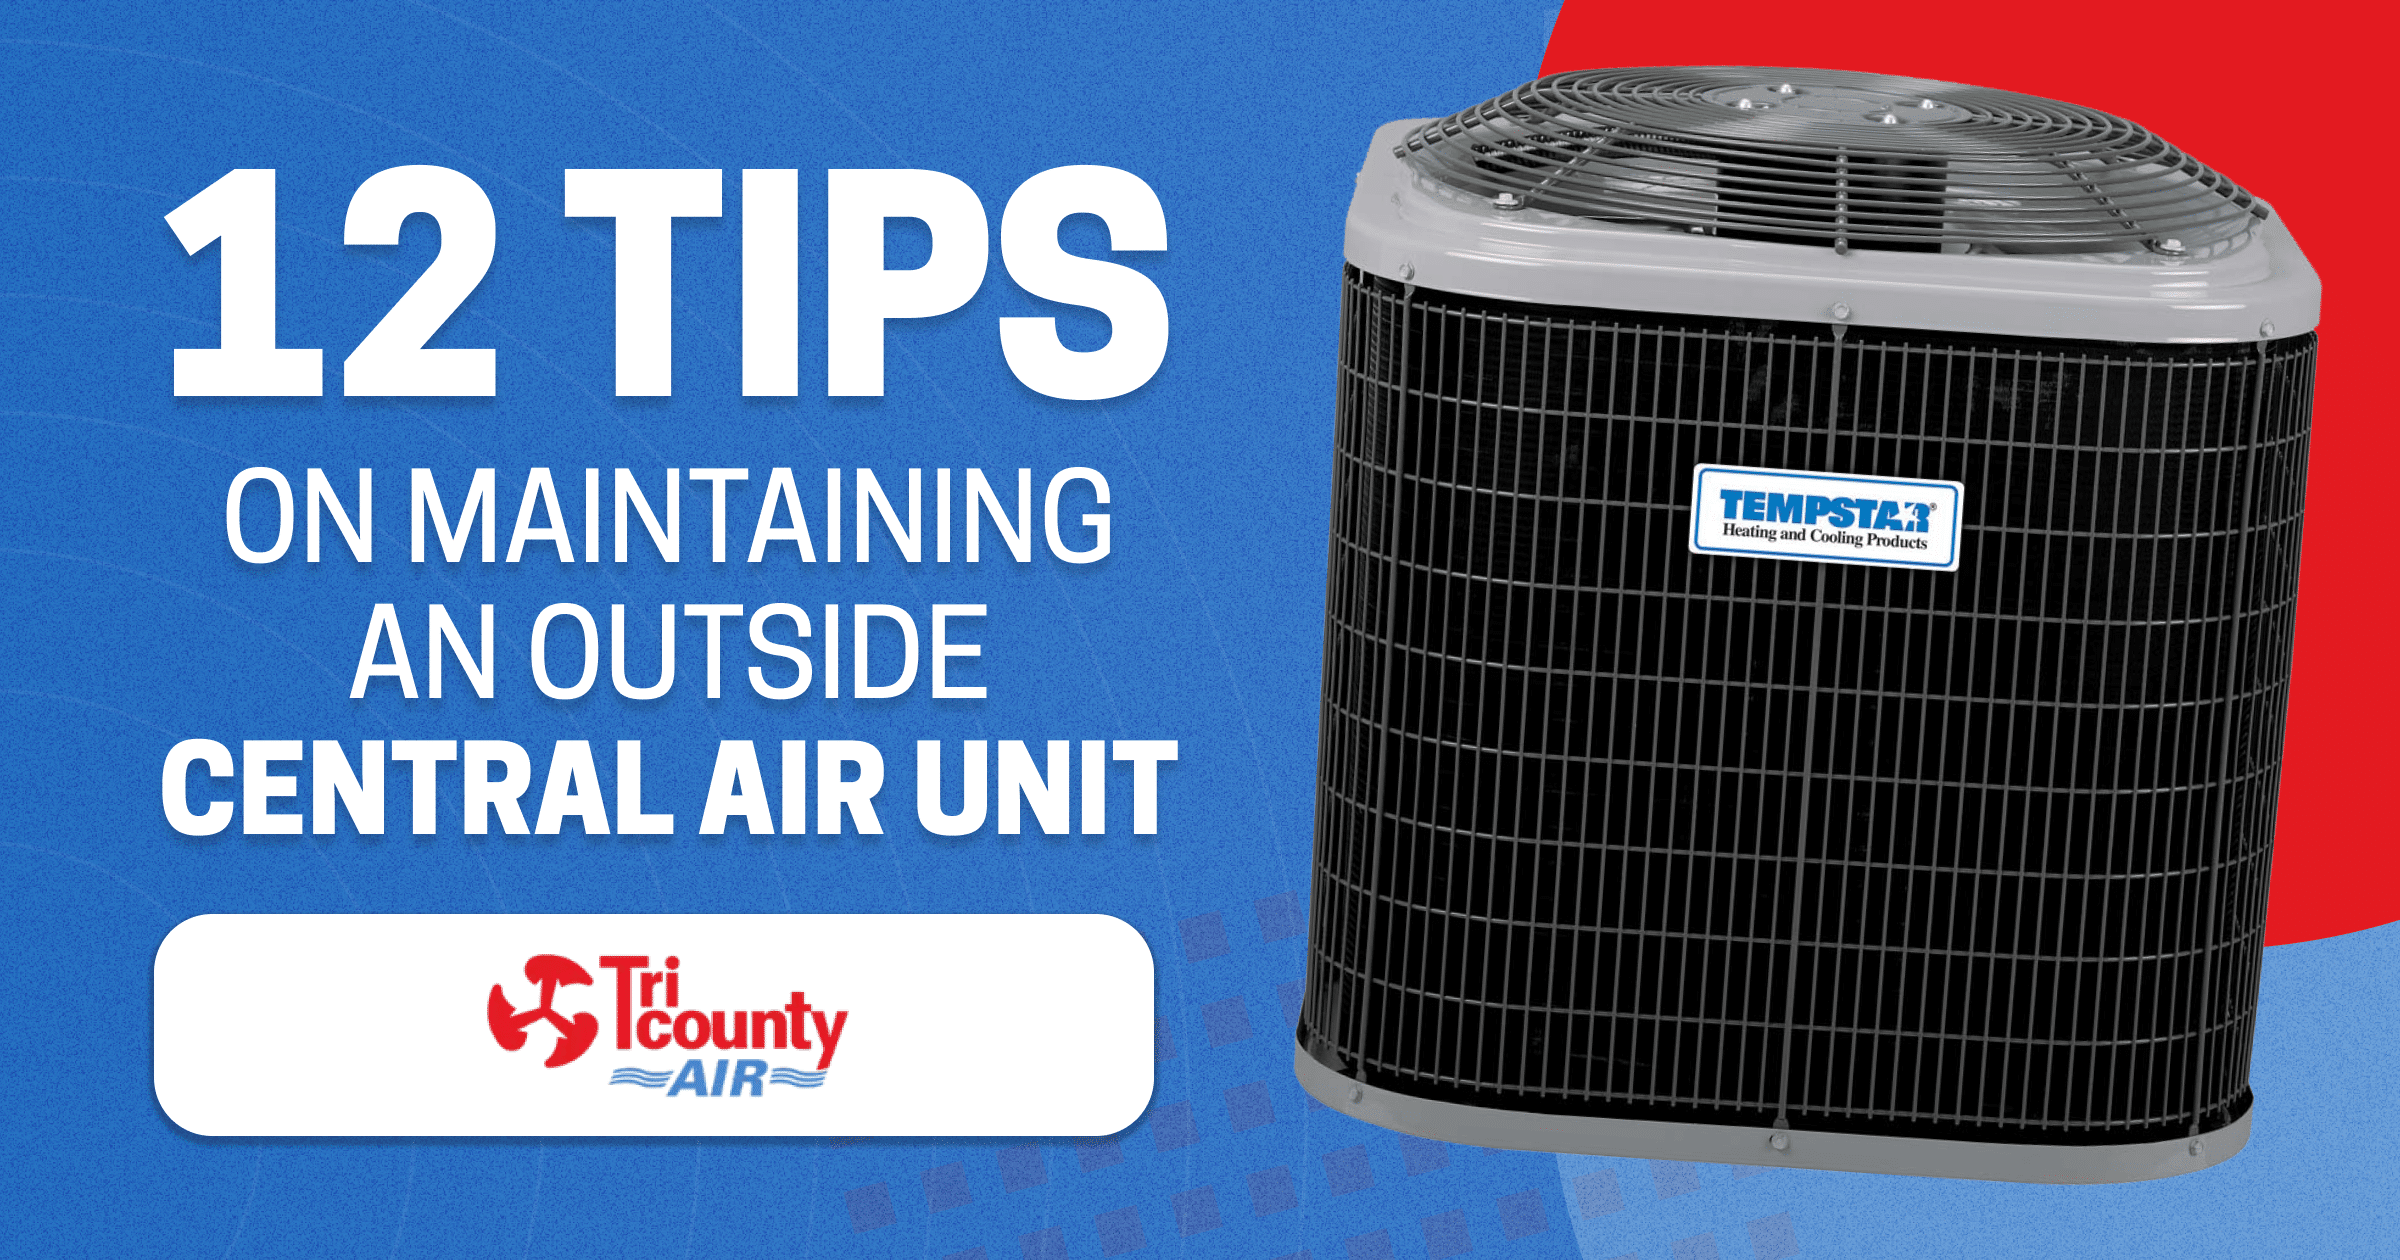 12 Tips on Maintaining an Outside Central Air Unit